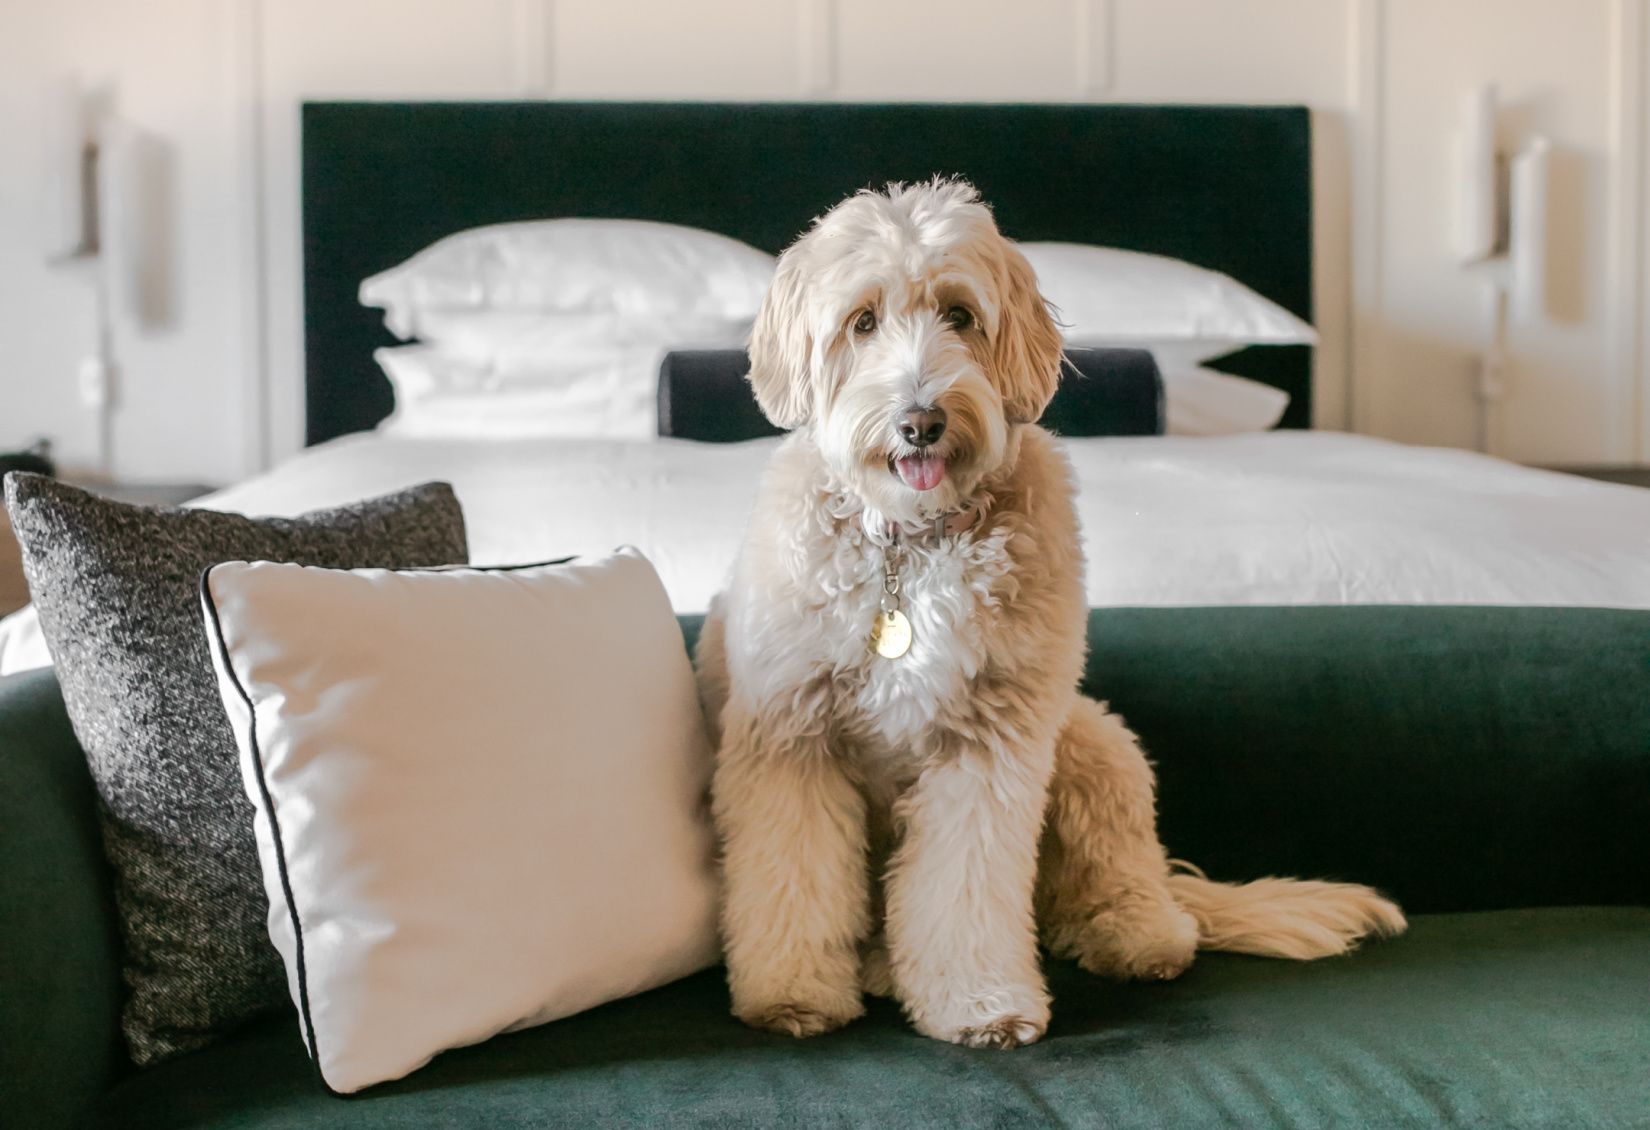 photo of a white dog on a green velvet couch in front of the bed